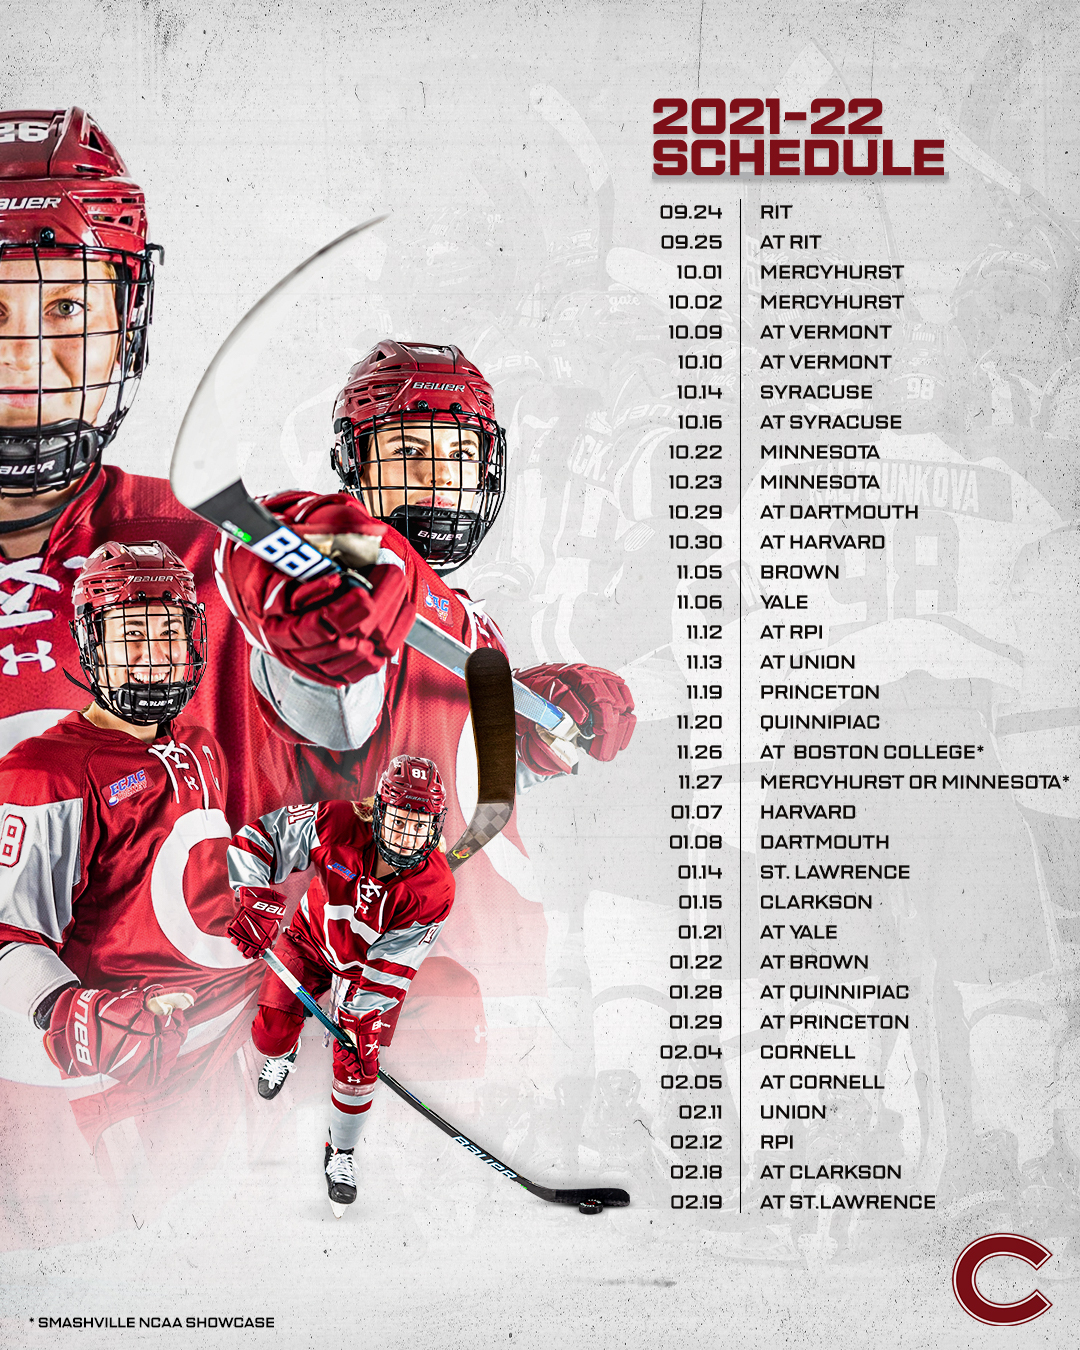 Colgate Women’s Hockey on Twitter "The full slate is ready to go and